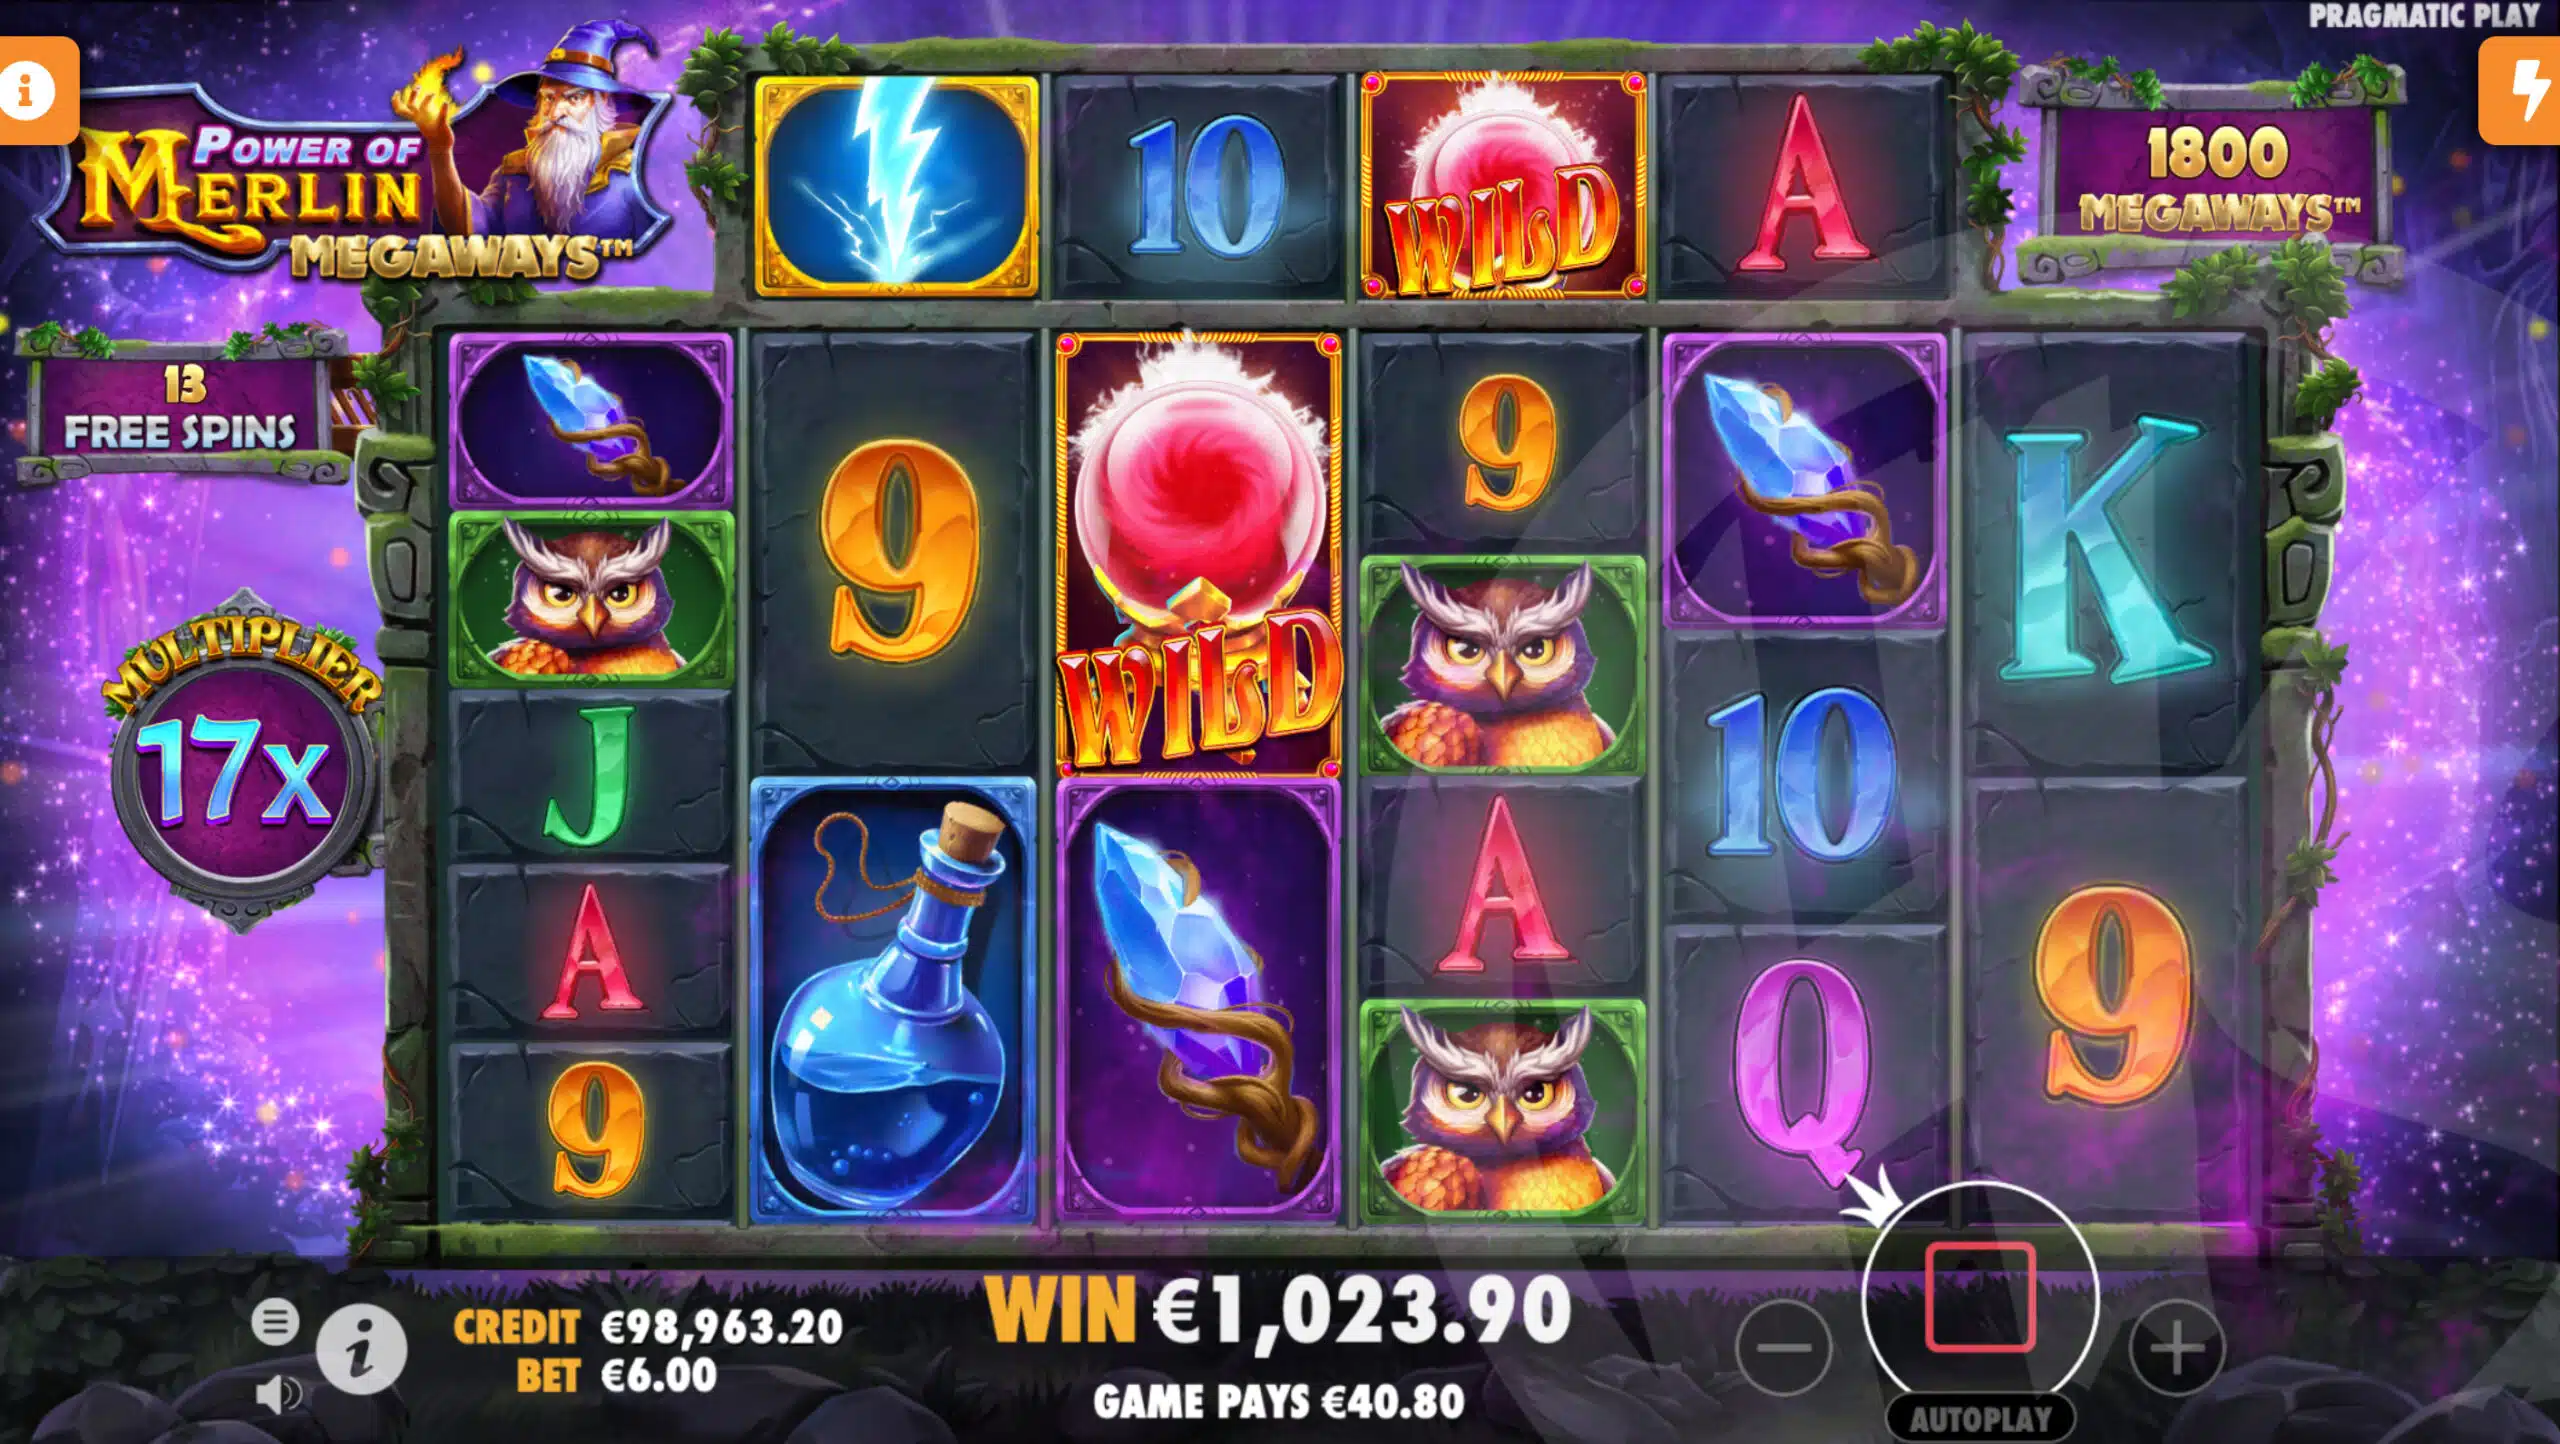 Build a Win Multiplier During Free Spins, Where the Lightning Bolt Feature Continues to be Available